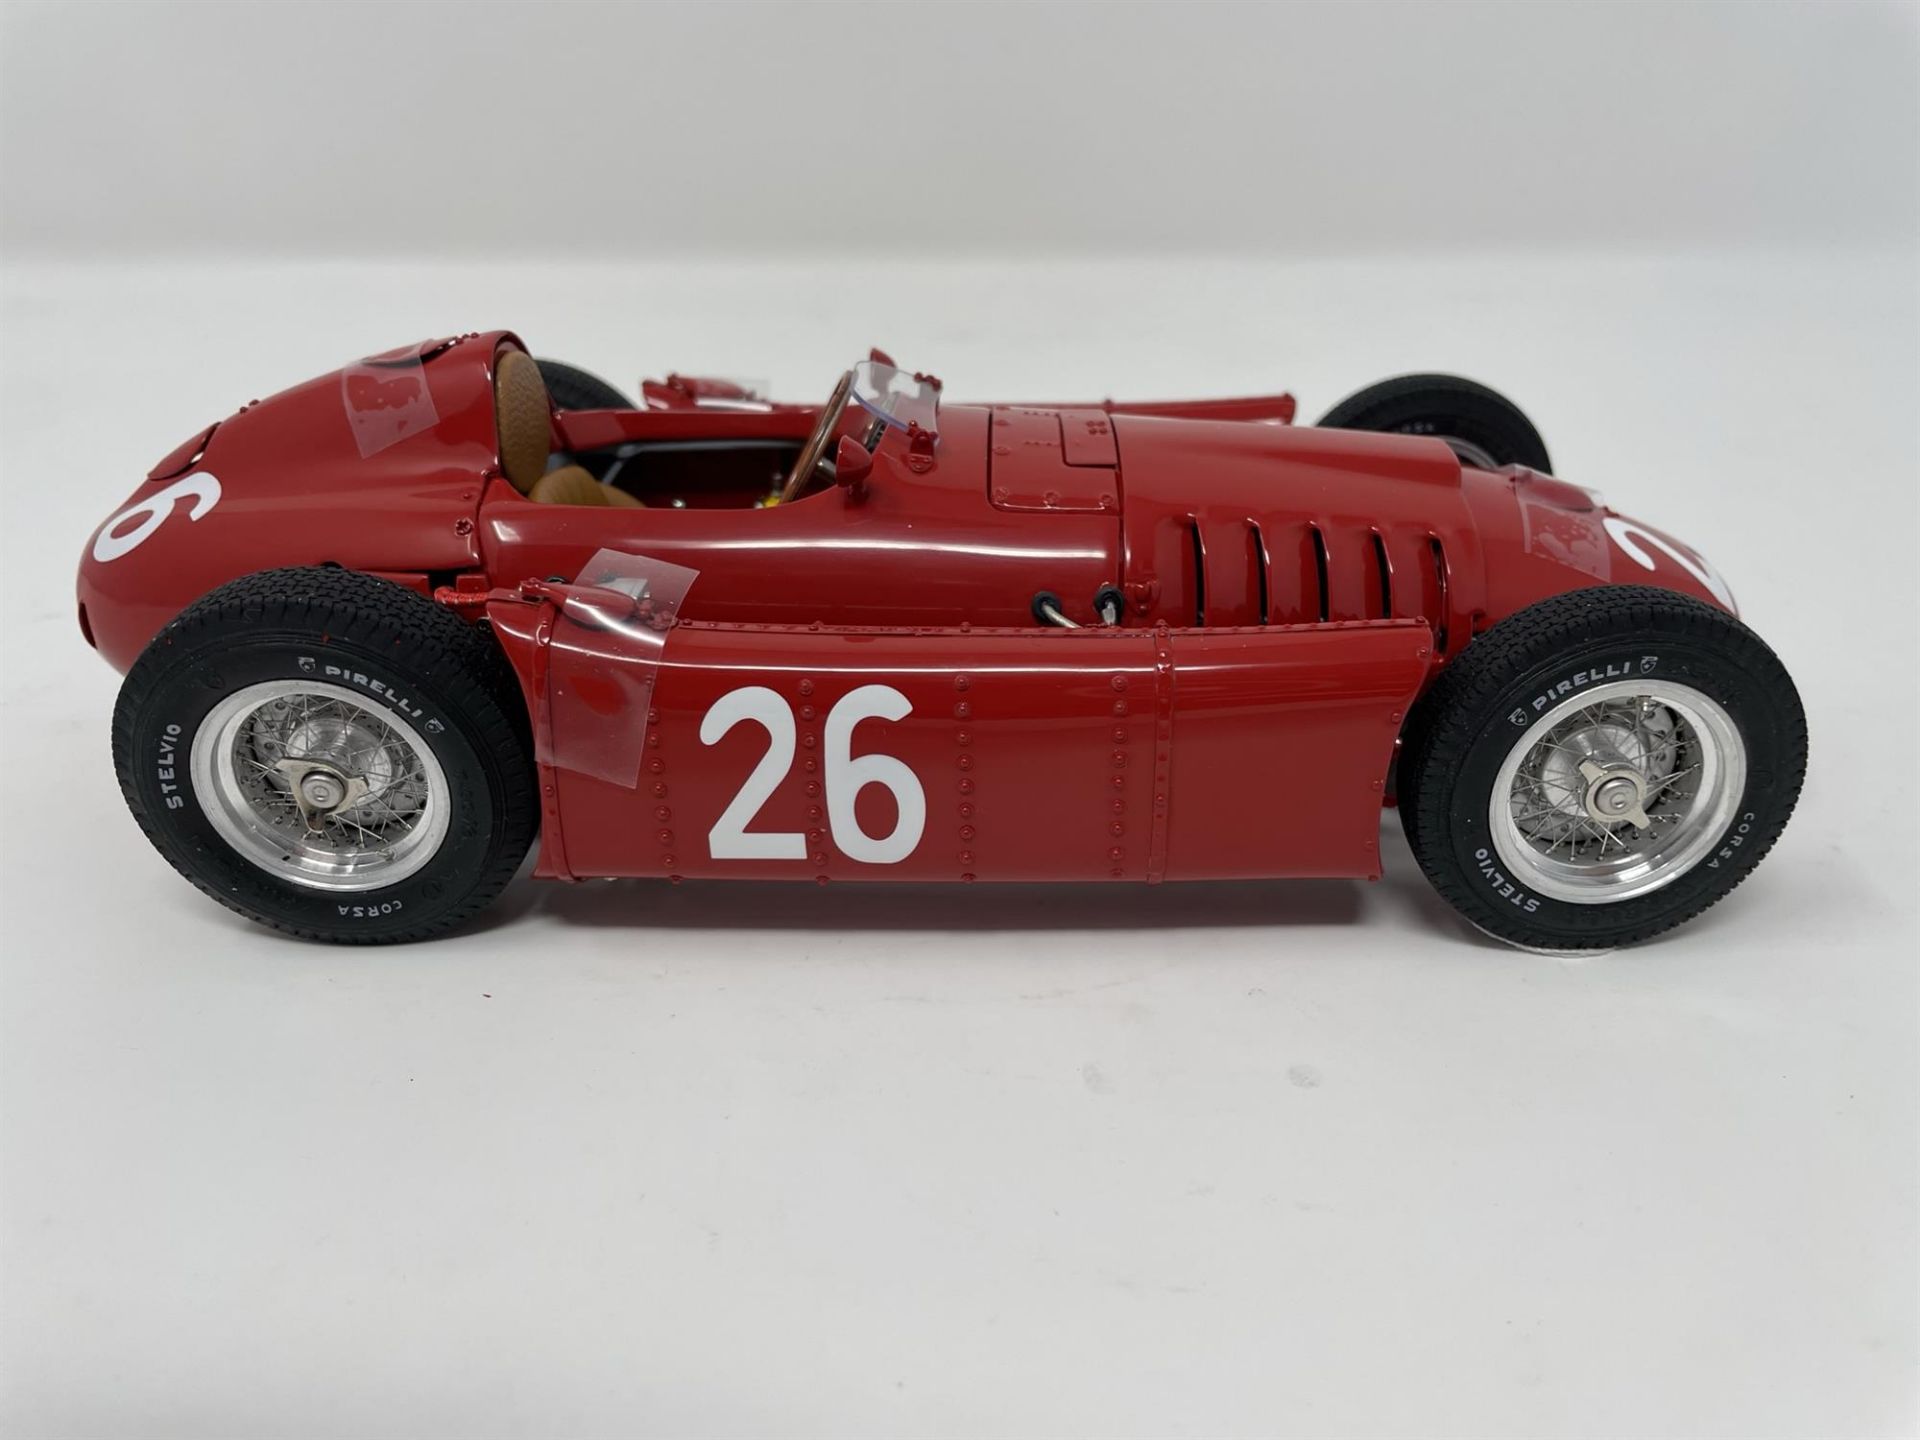 CMC Lancia D50 1:18th Scale Highly Detailed Model - Image 10 of 10